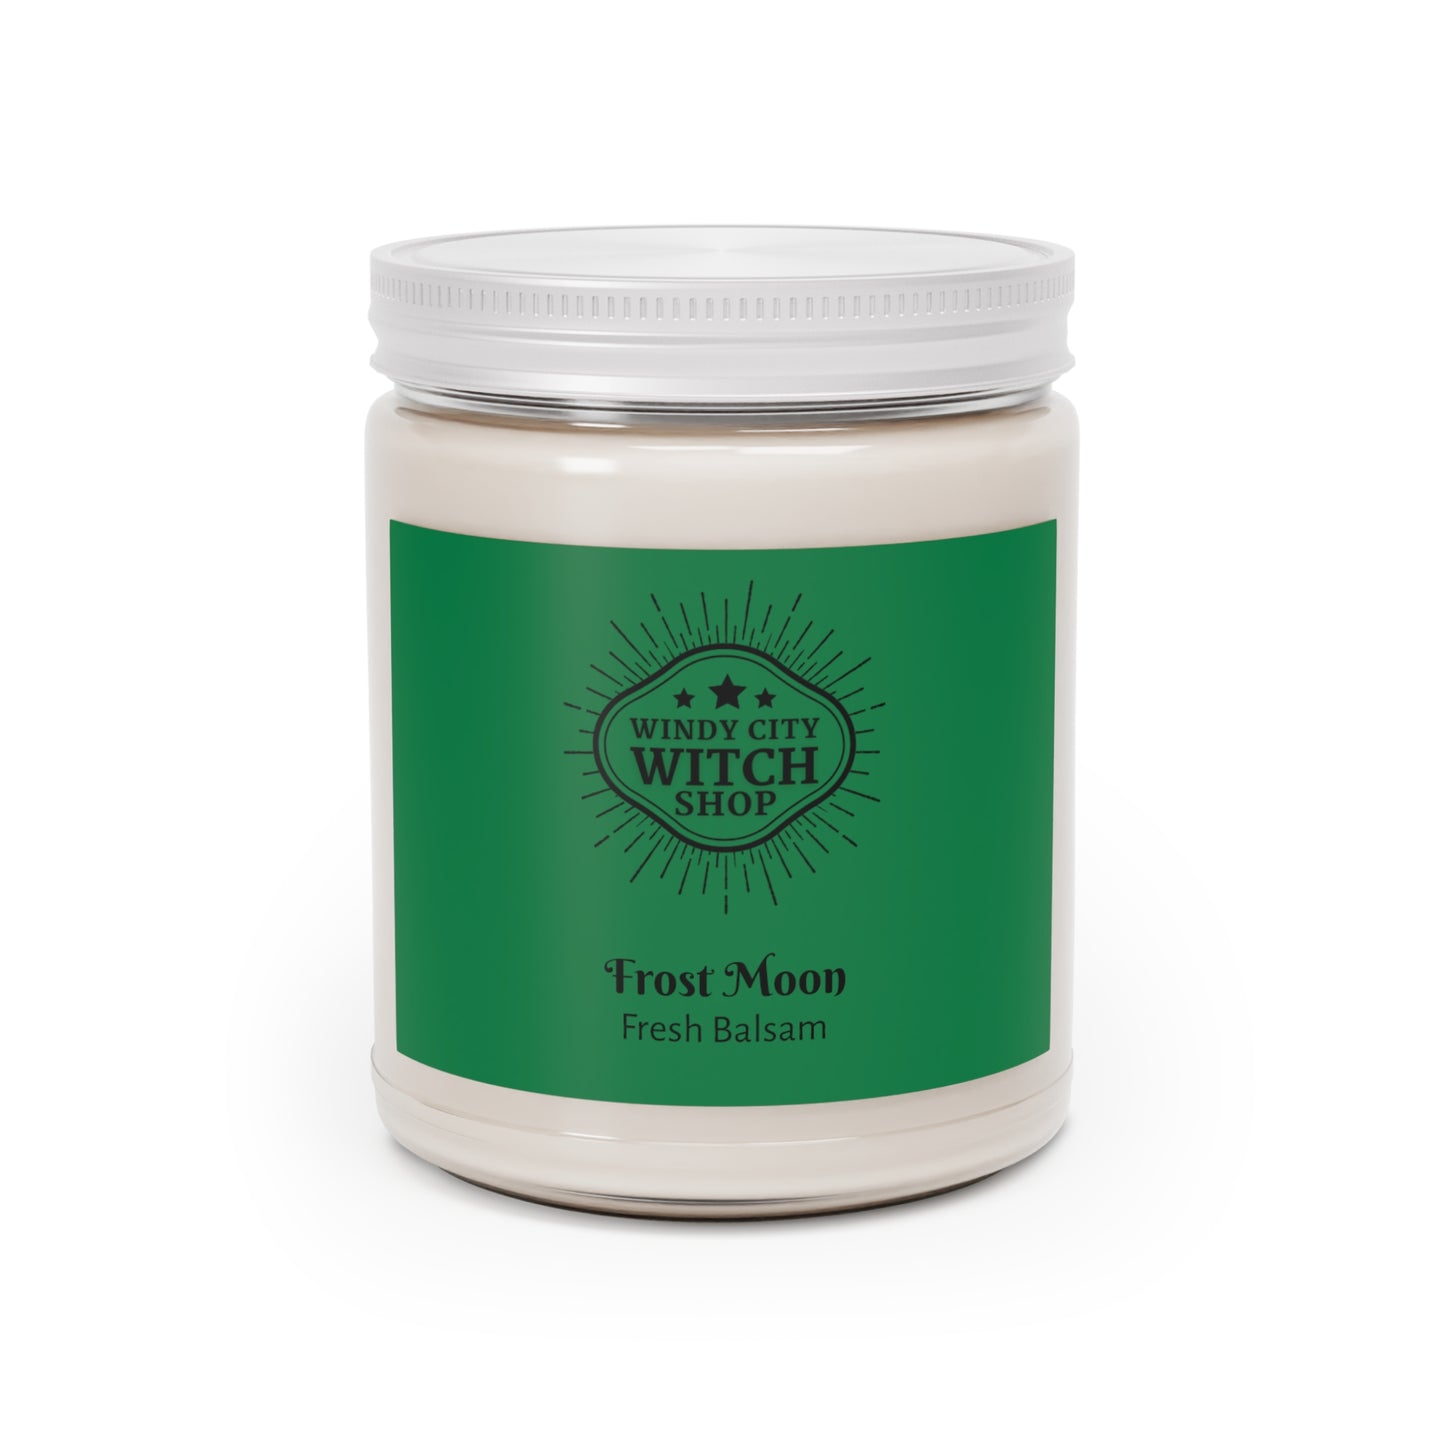 Frost Moon candle, scented